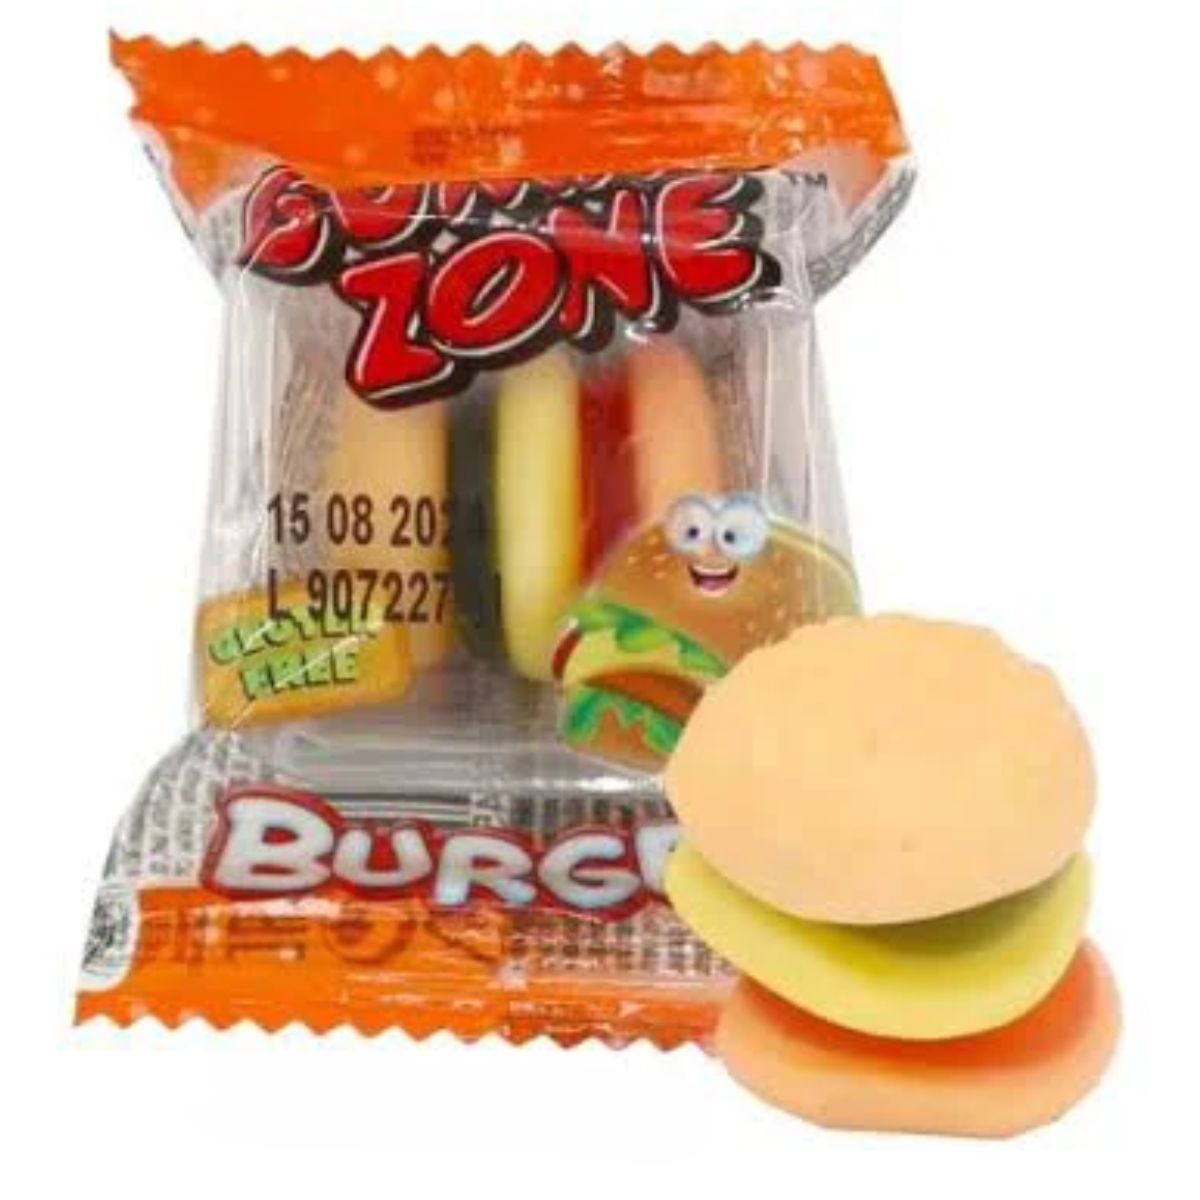 A bag of Gummi Zone - Burger Jelly - 7g candy with a burger on it.